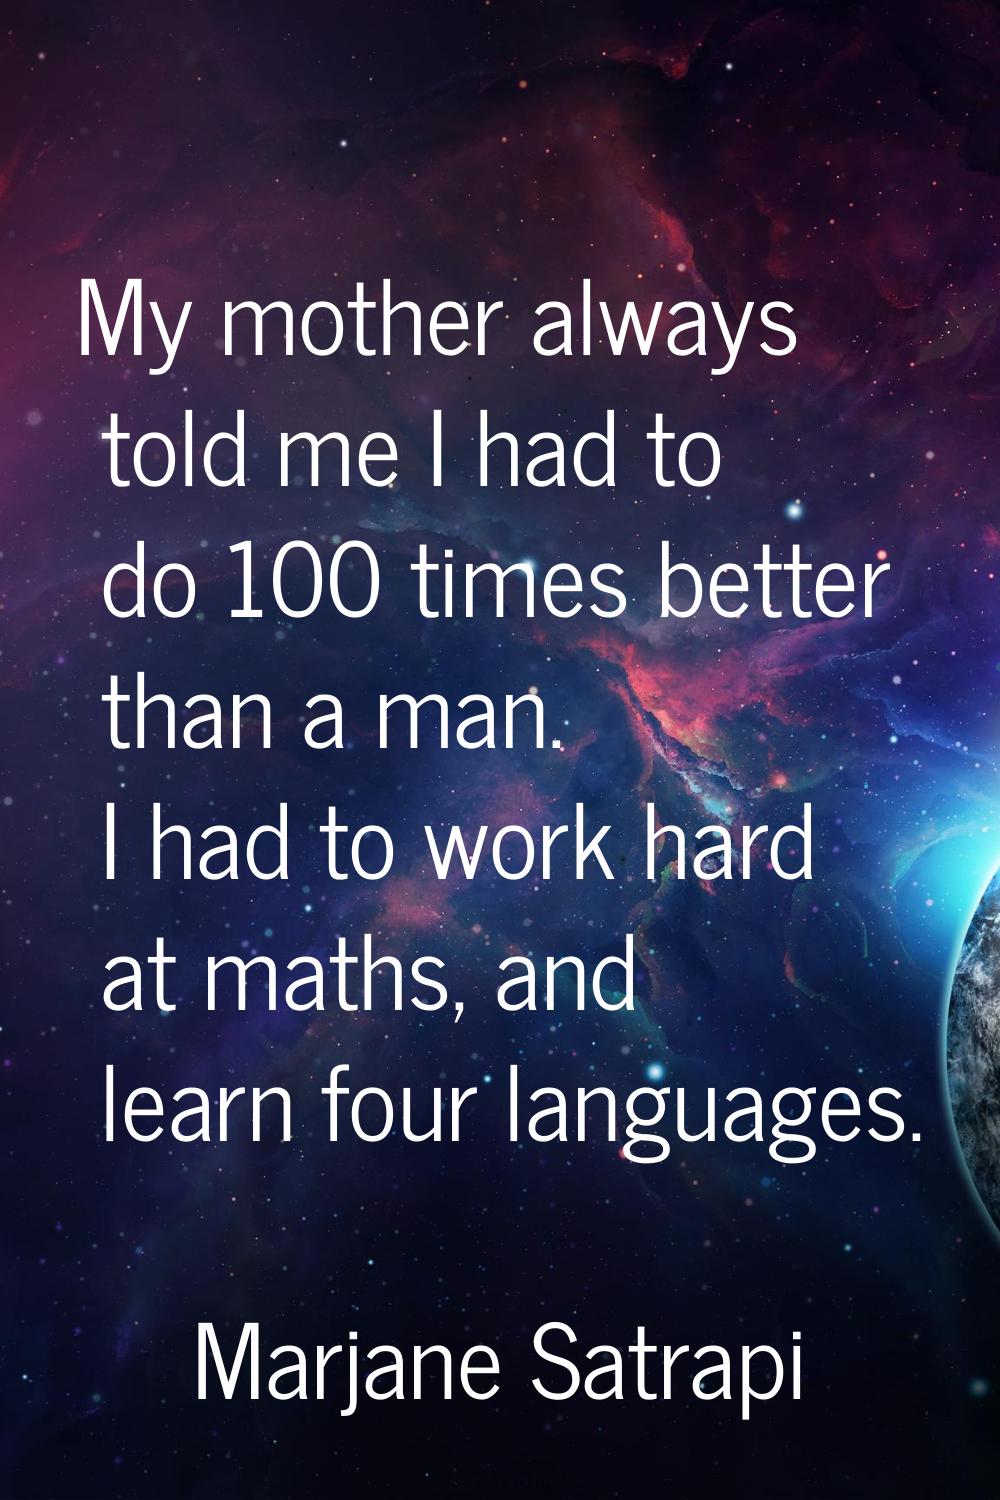 My mother always told me I had to do 100 times better than a man. I had to work hard at maths, and 